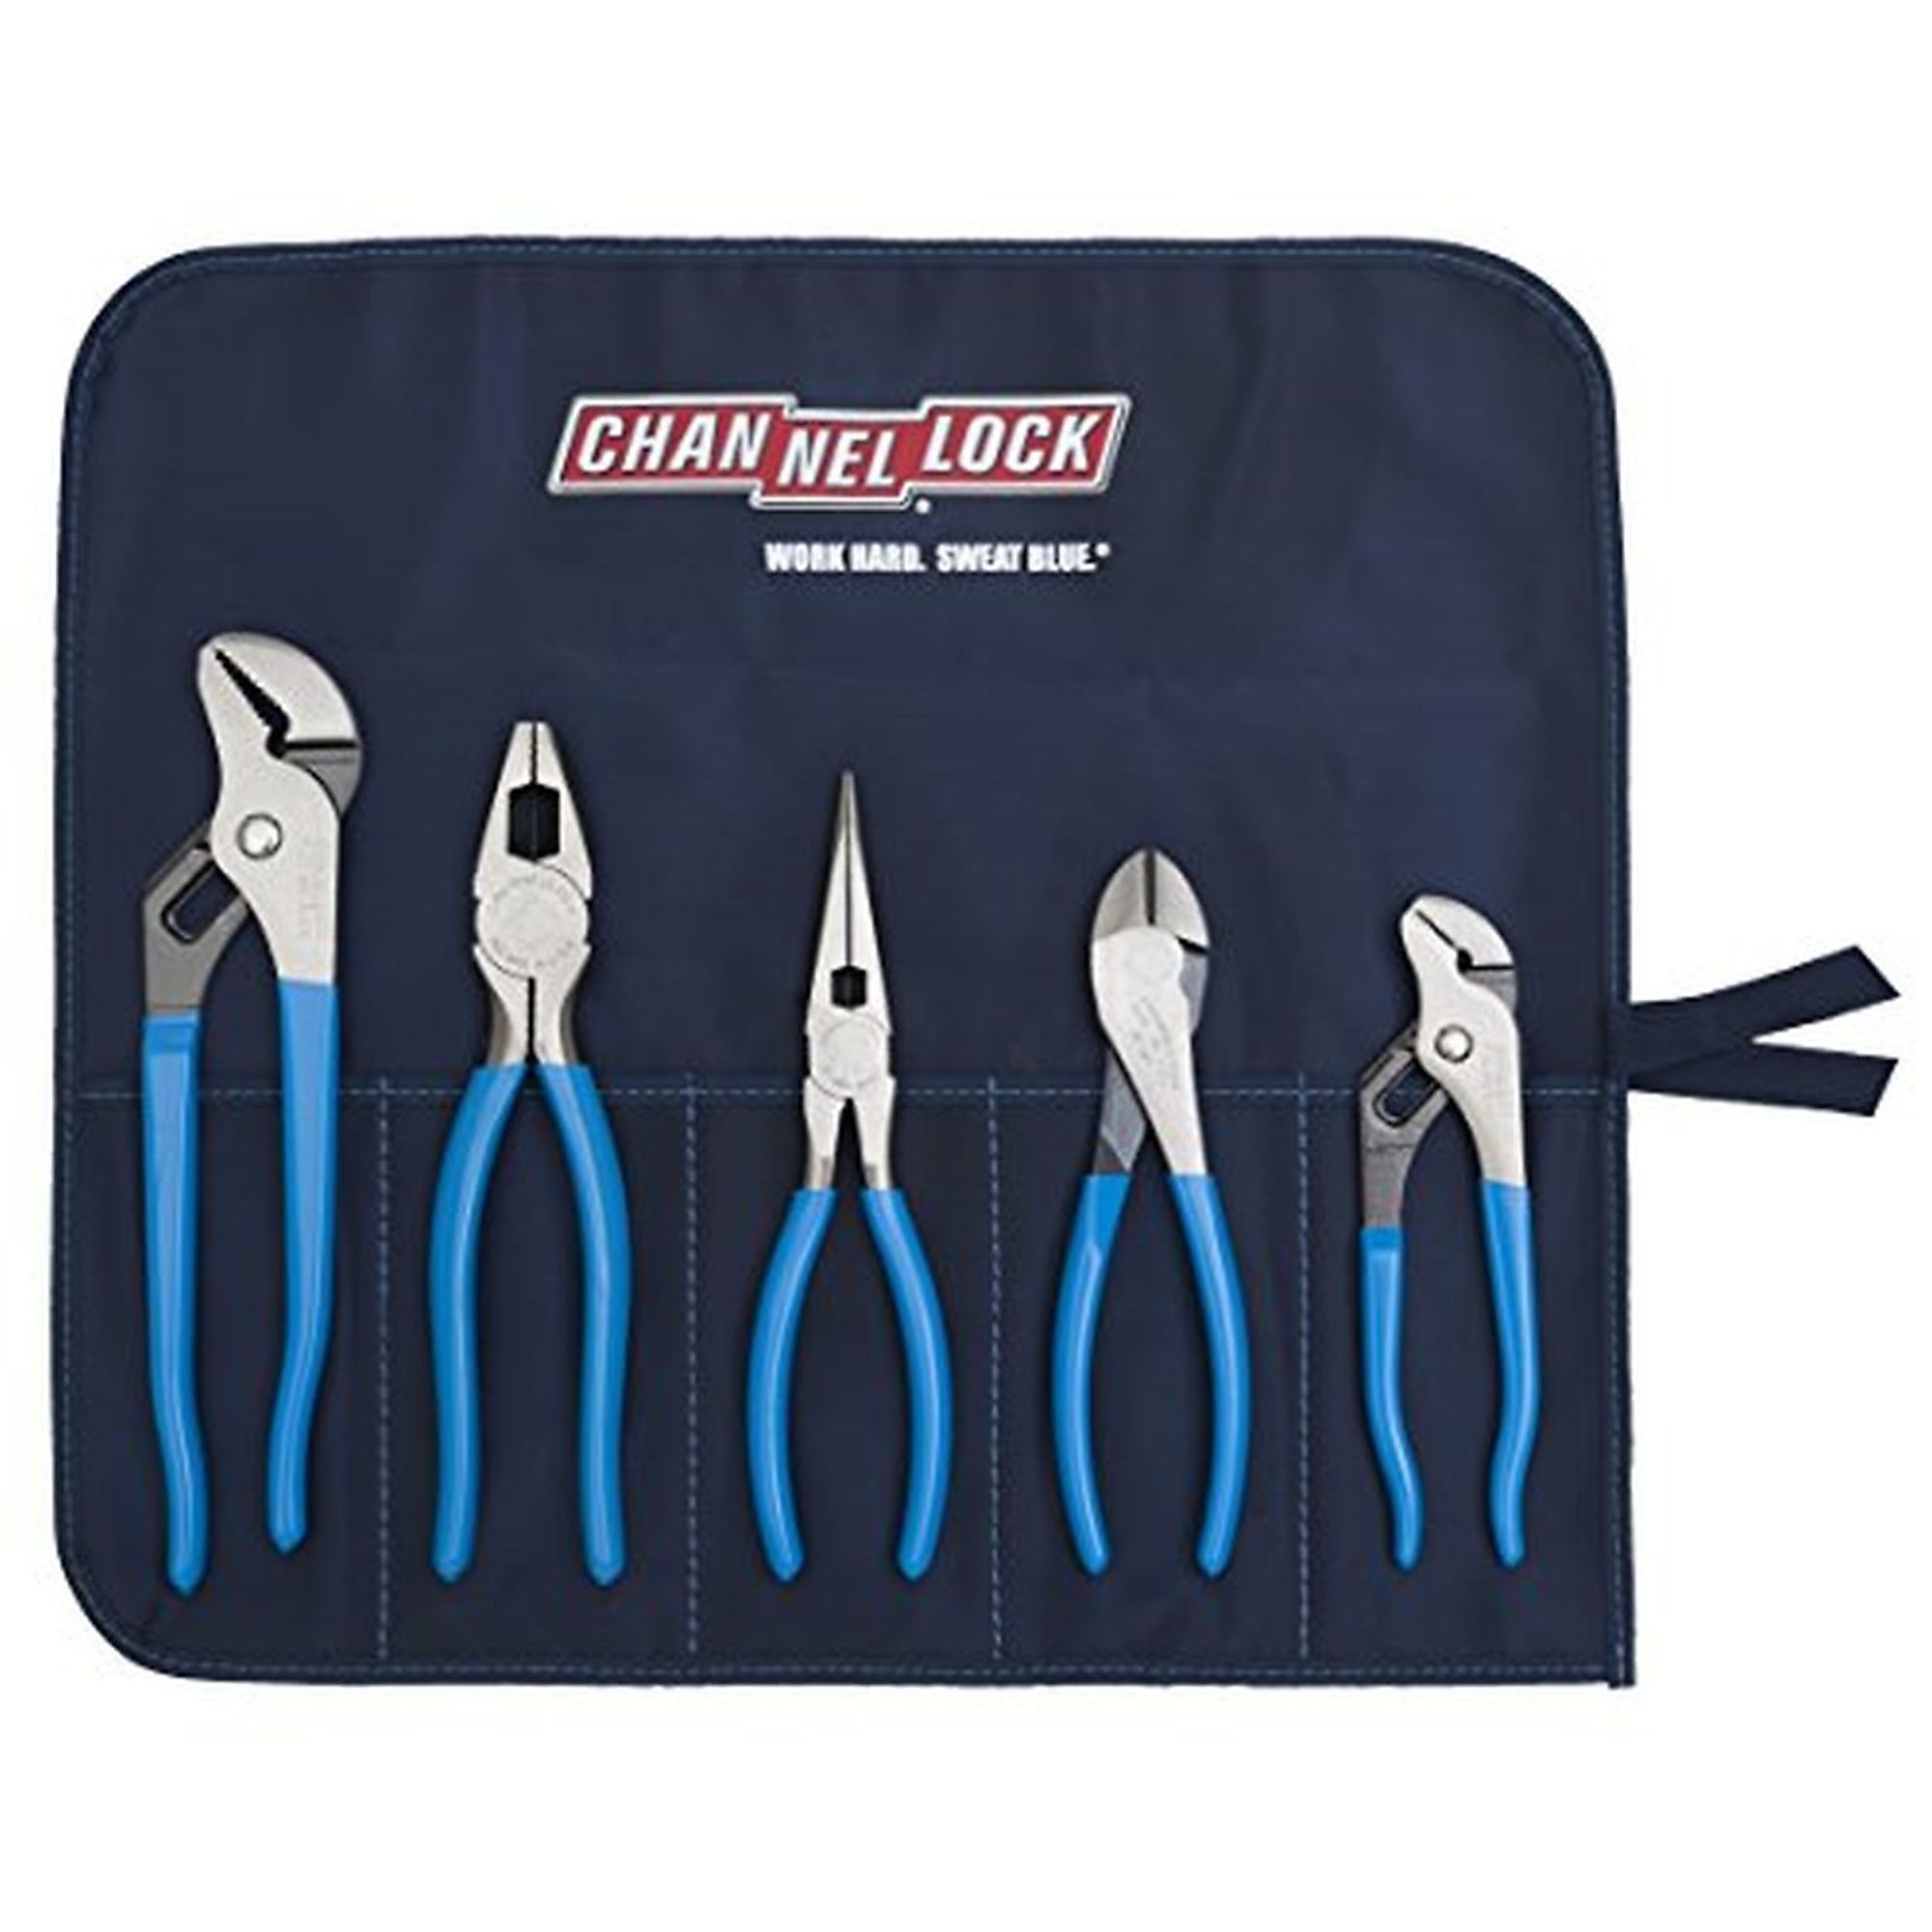 Channellock 387-TOOL ROLL-5